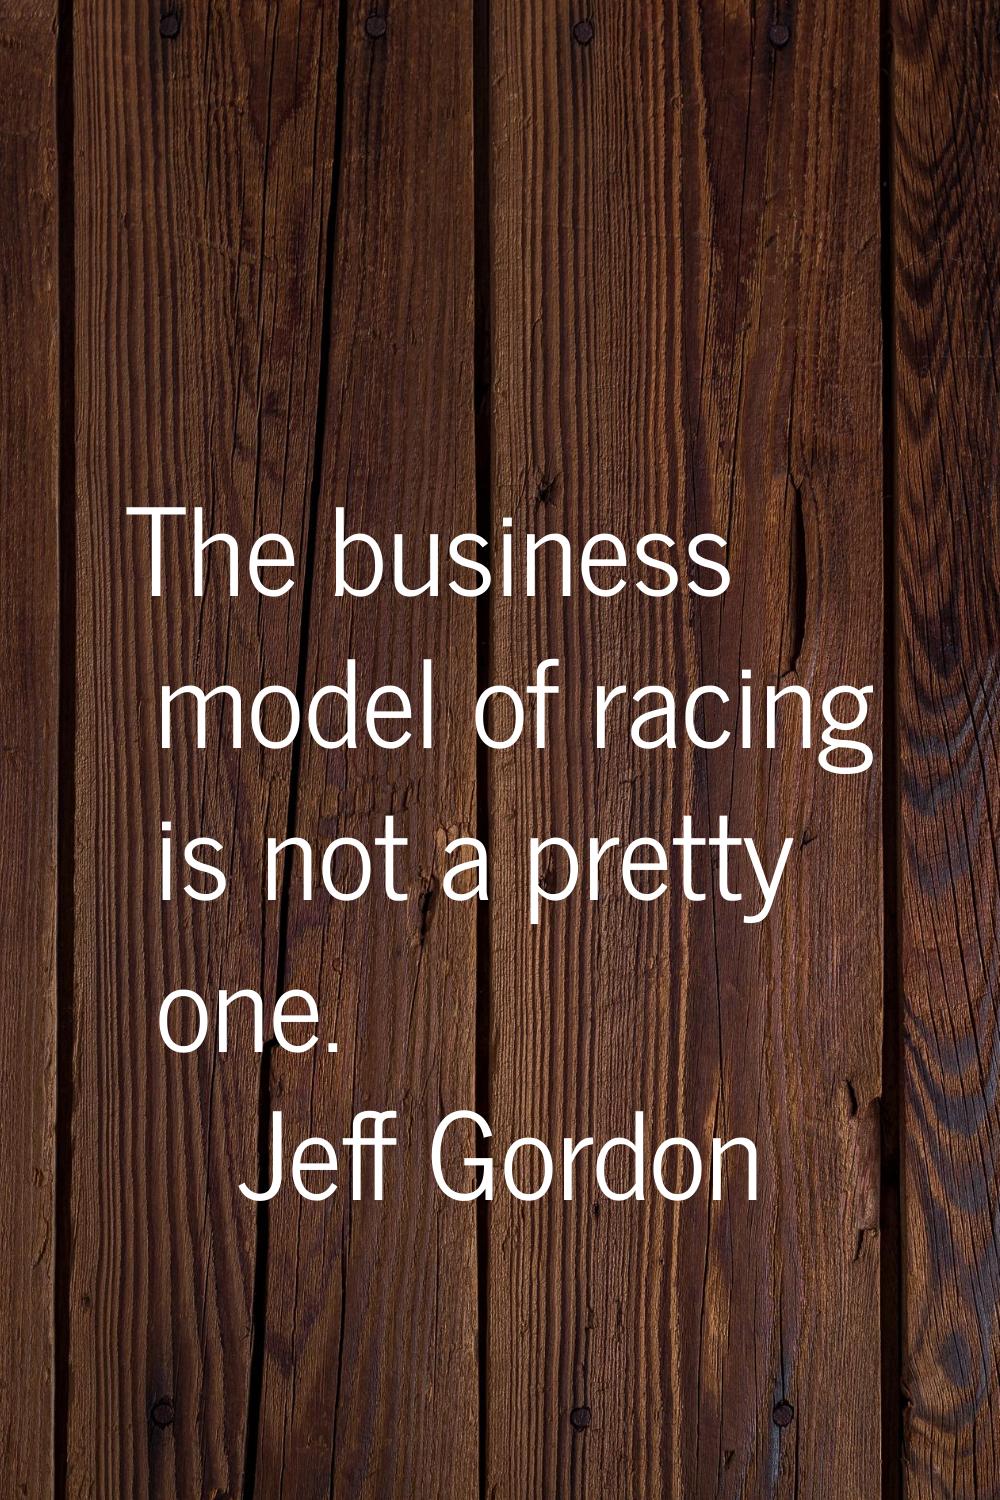 The business model of racing is not a pretty one.